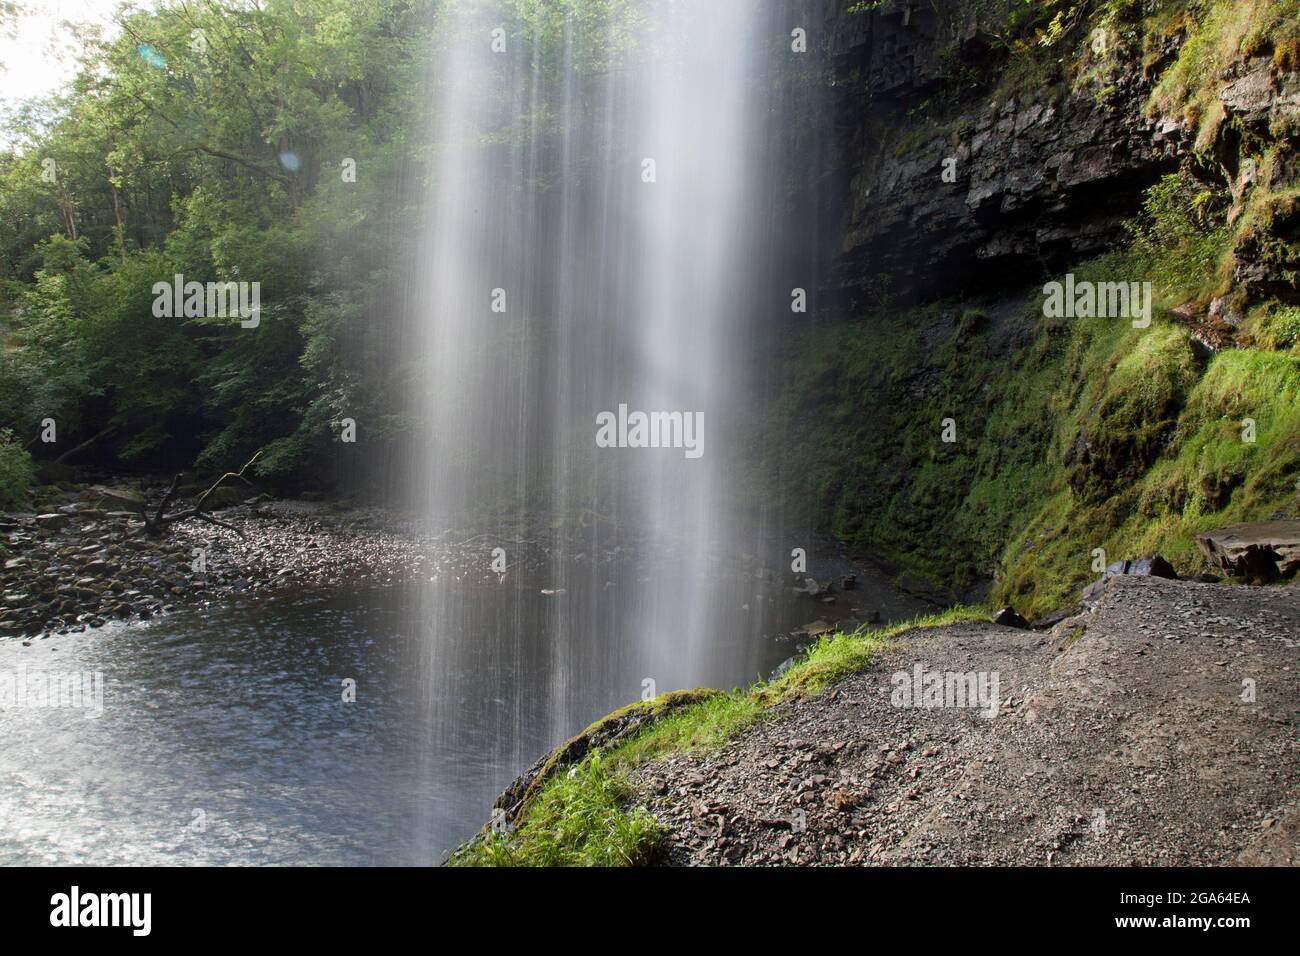 Slow exposure photograph taken looking out from behind Henrhyd waterfalls, Neath, the tallest waterfall in southern Wales at 90 feet. Stock Photo